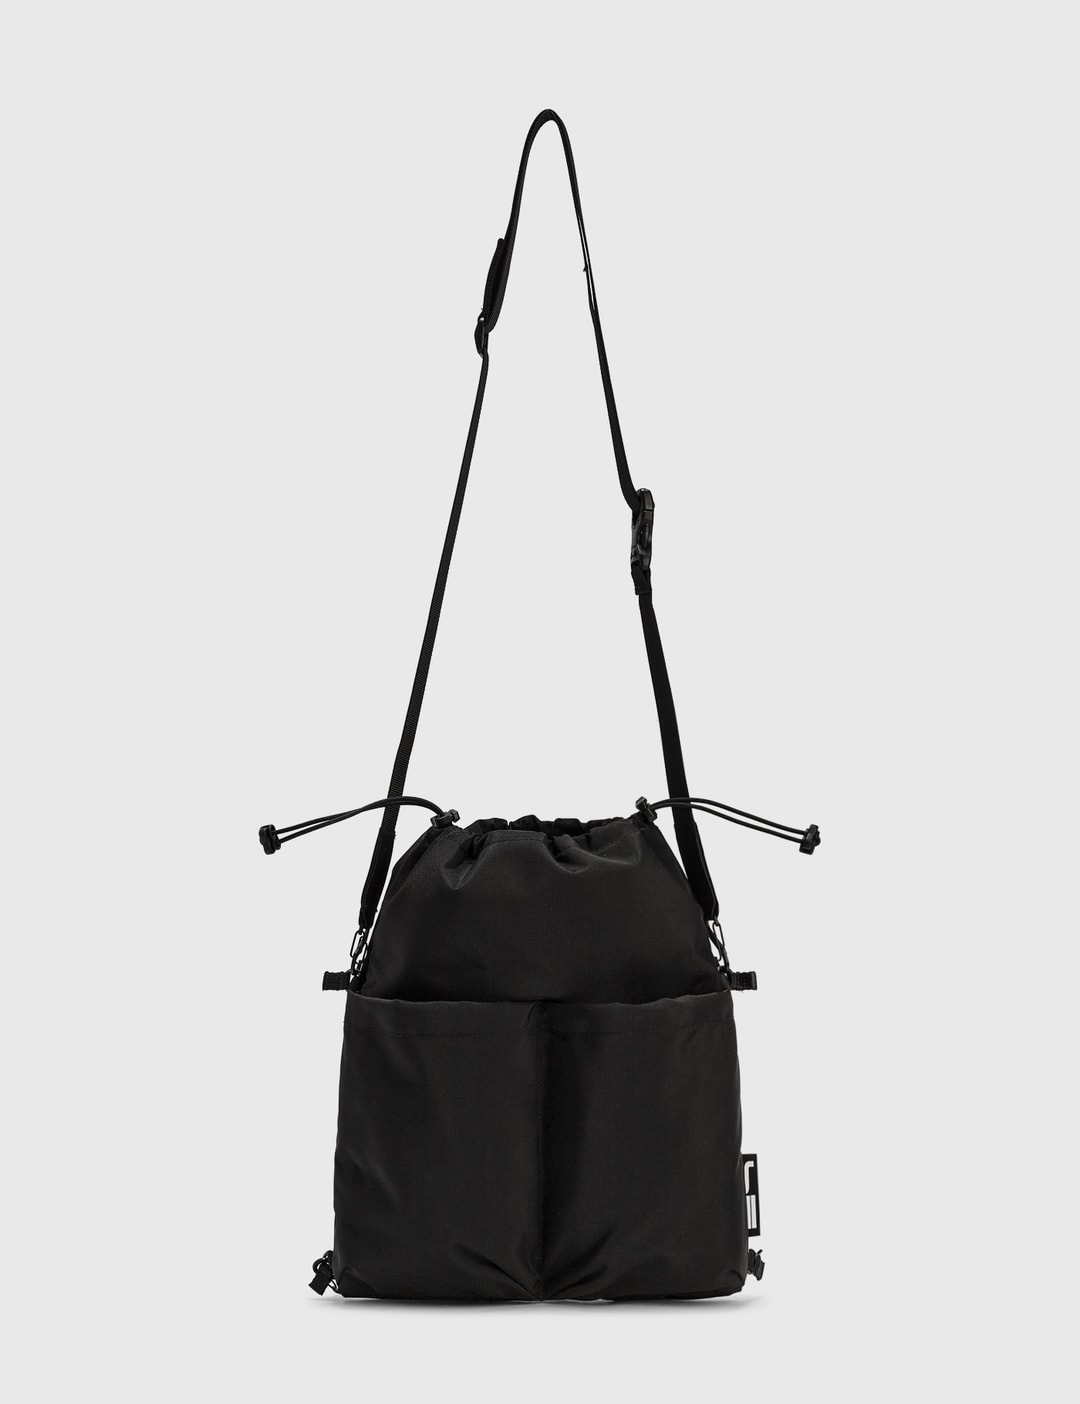 Sealson - H1 Crossbody Bag | HBX - Globally Curated Fashion and ...